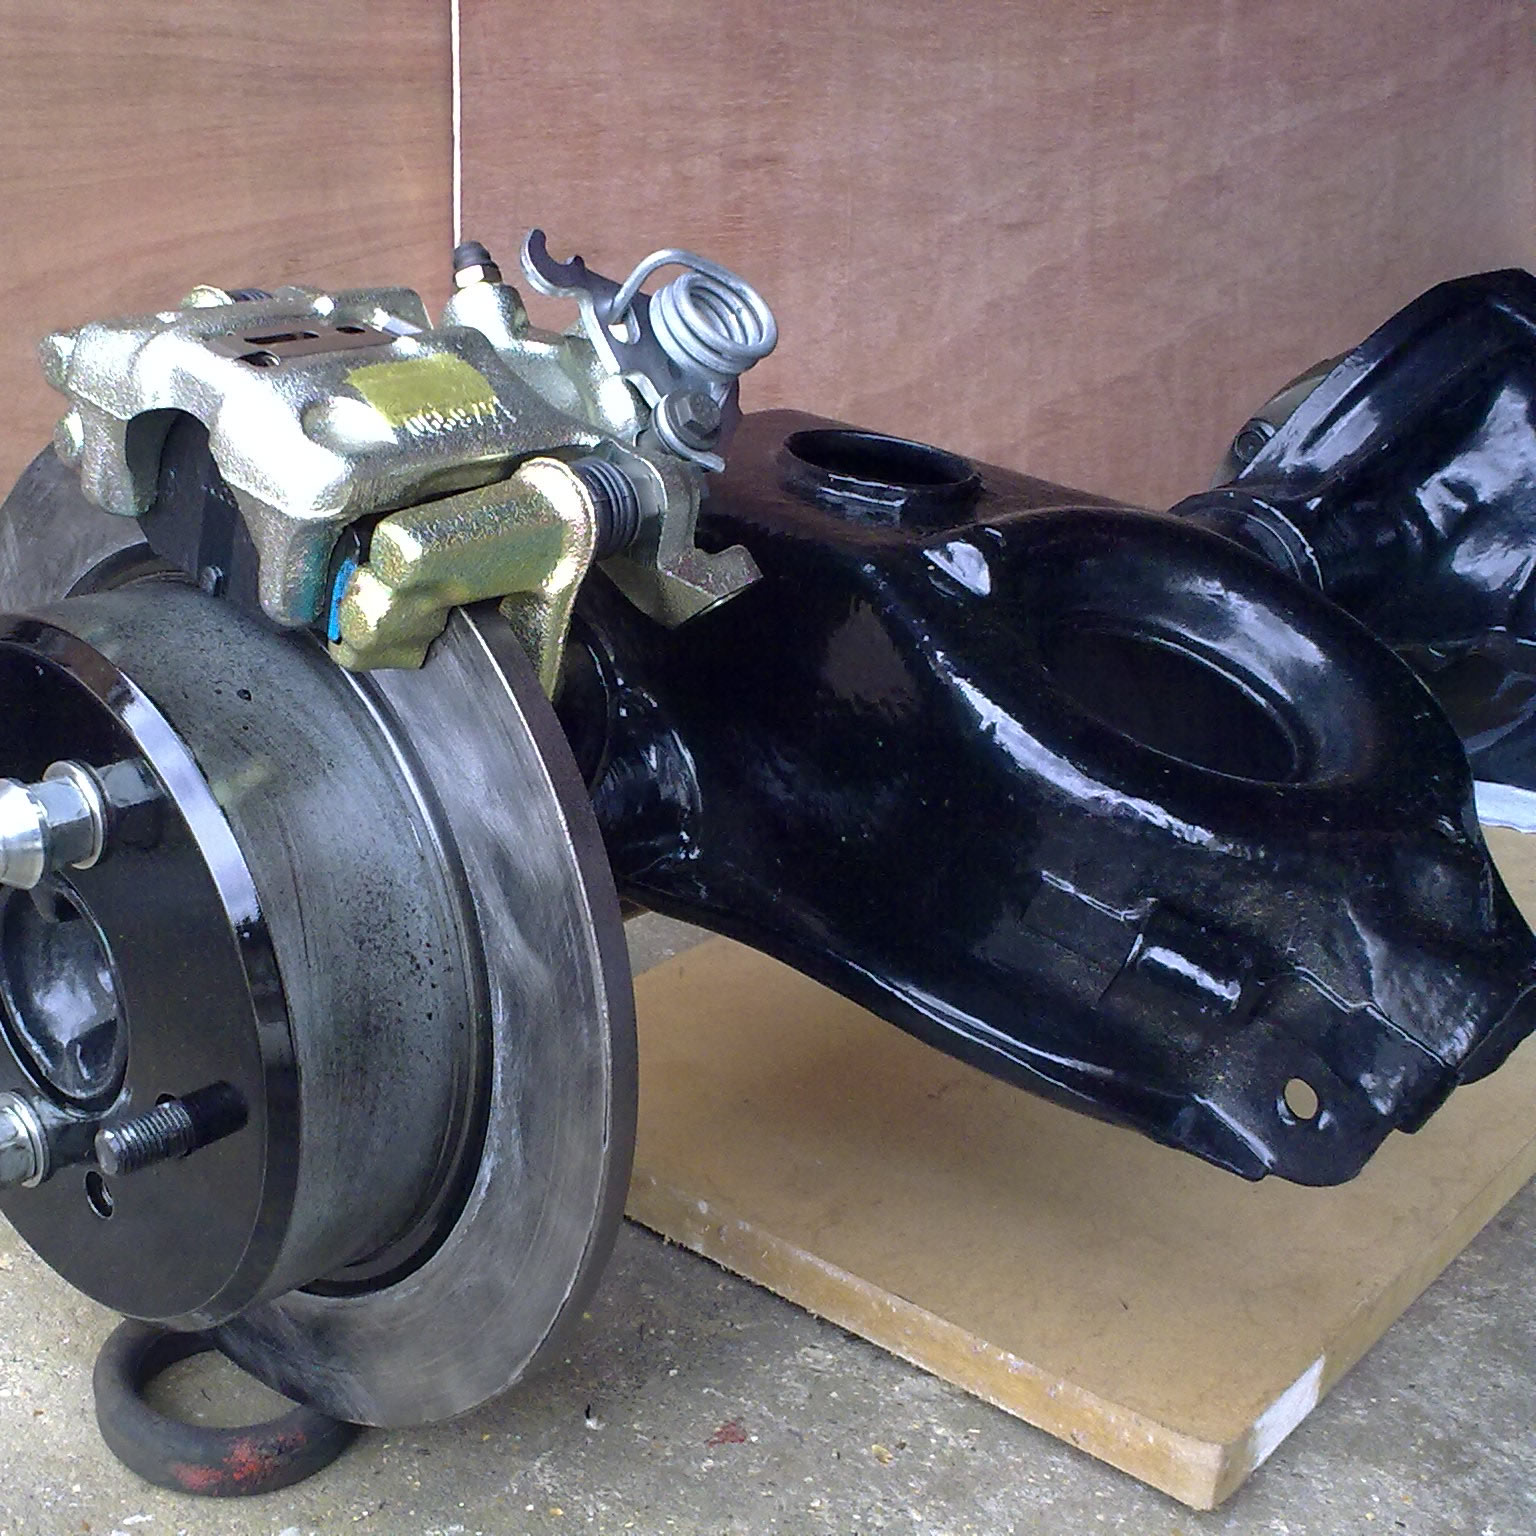 trial fit up of the brakes